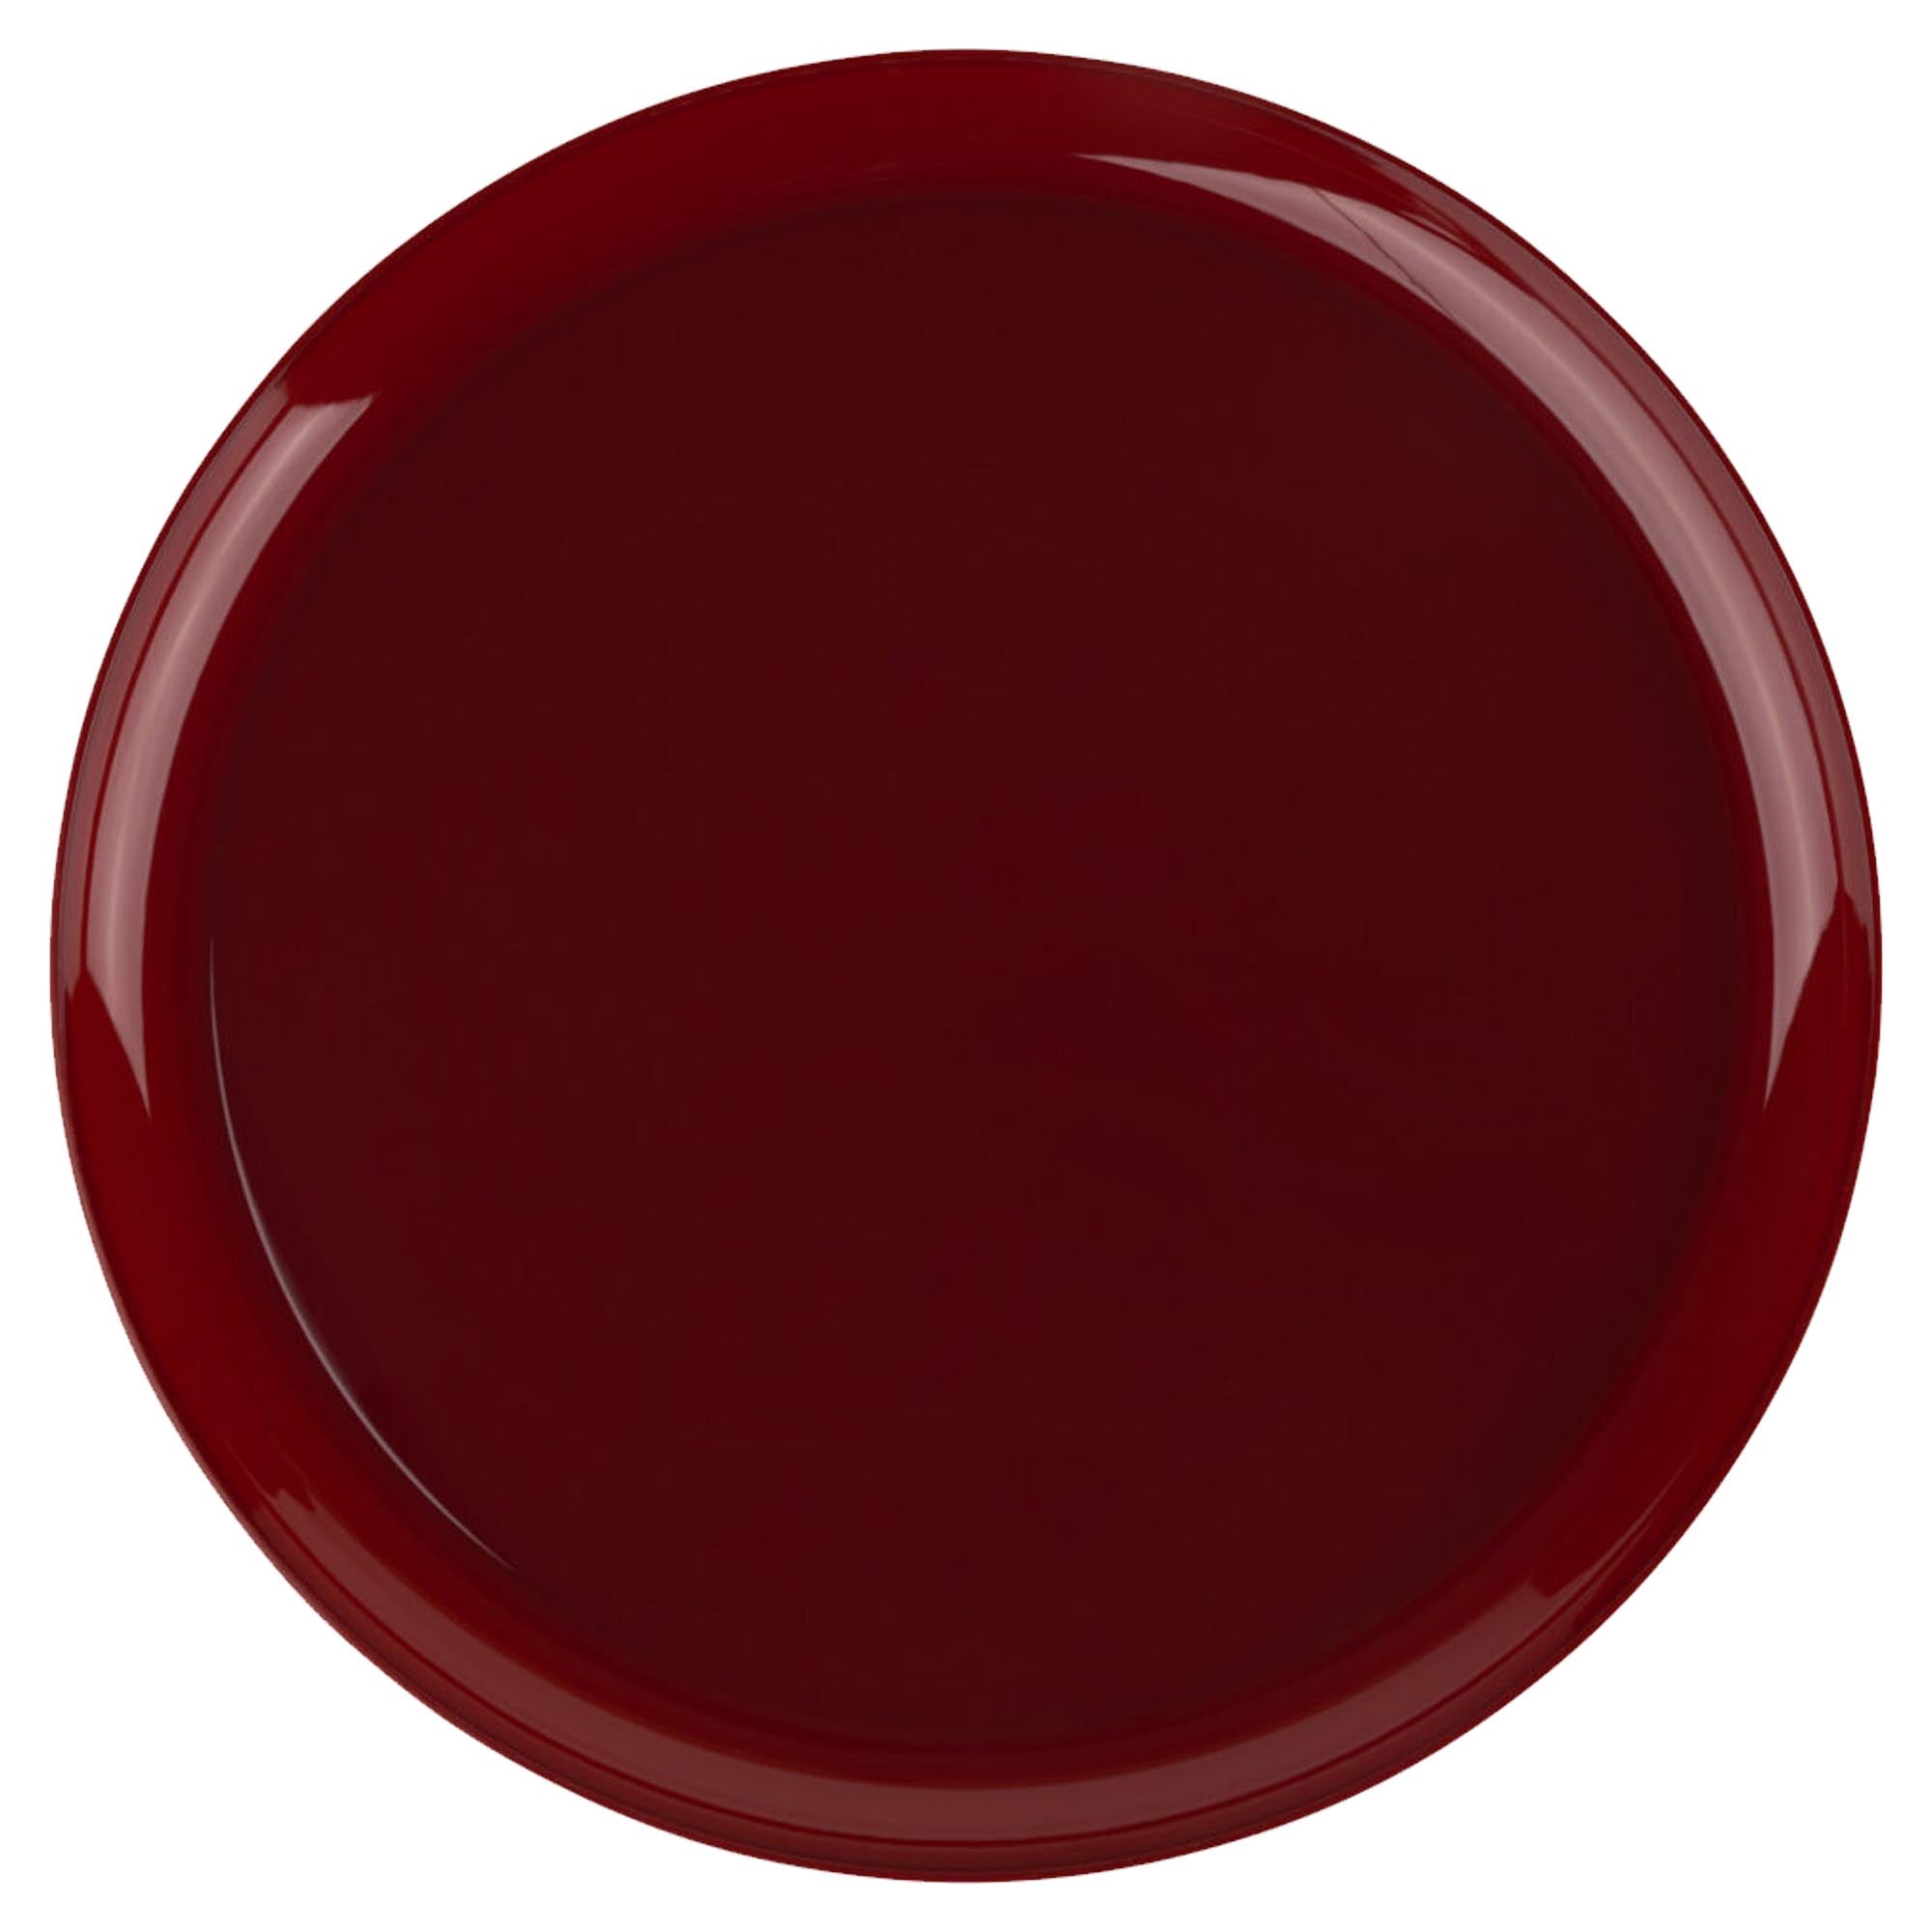 Plastic Tableware Cranberry Red Plates Edge Collection Dinner Party Set